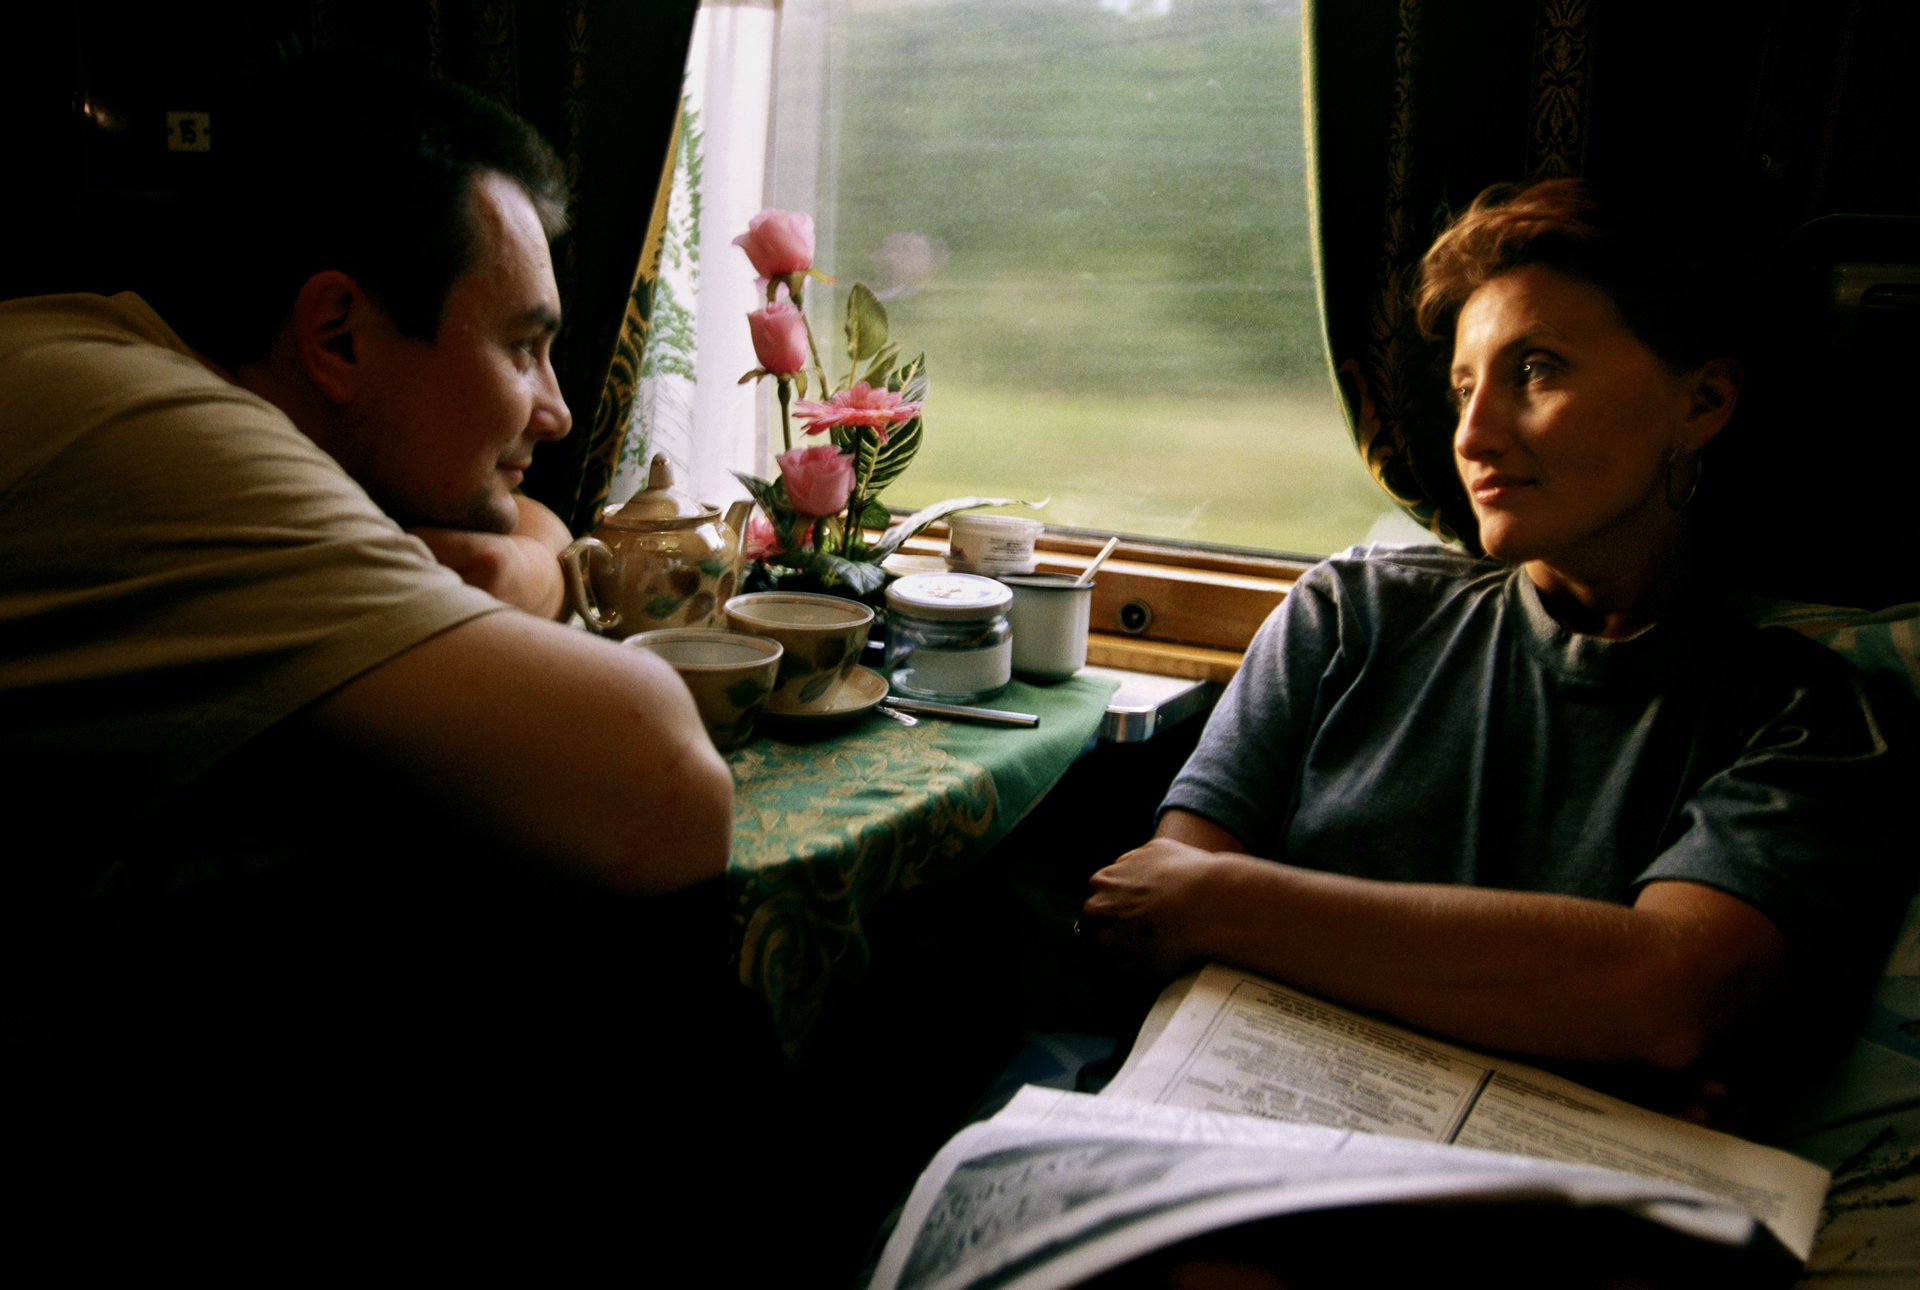  A couple who met aboard the Trans-Siberian savor a first-class moment together.  The Urals, Russia  